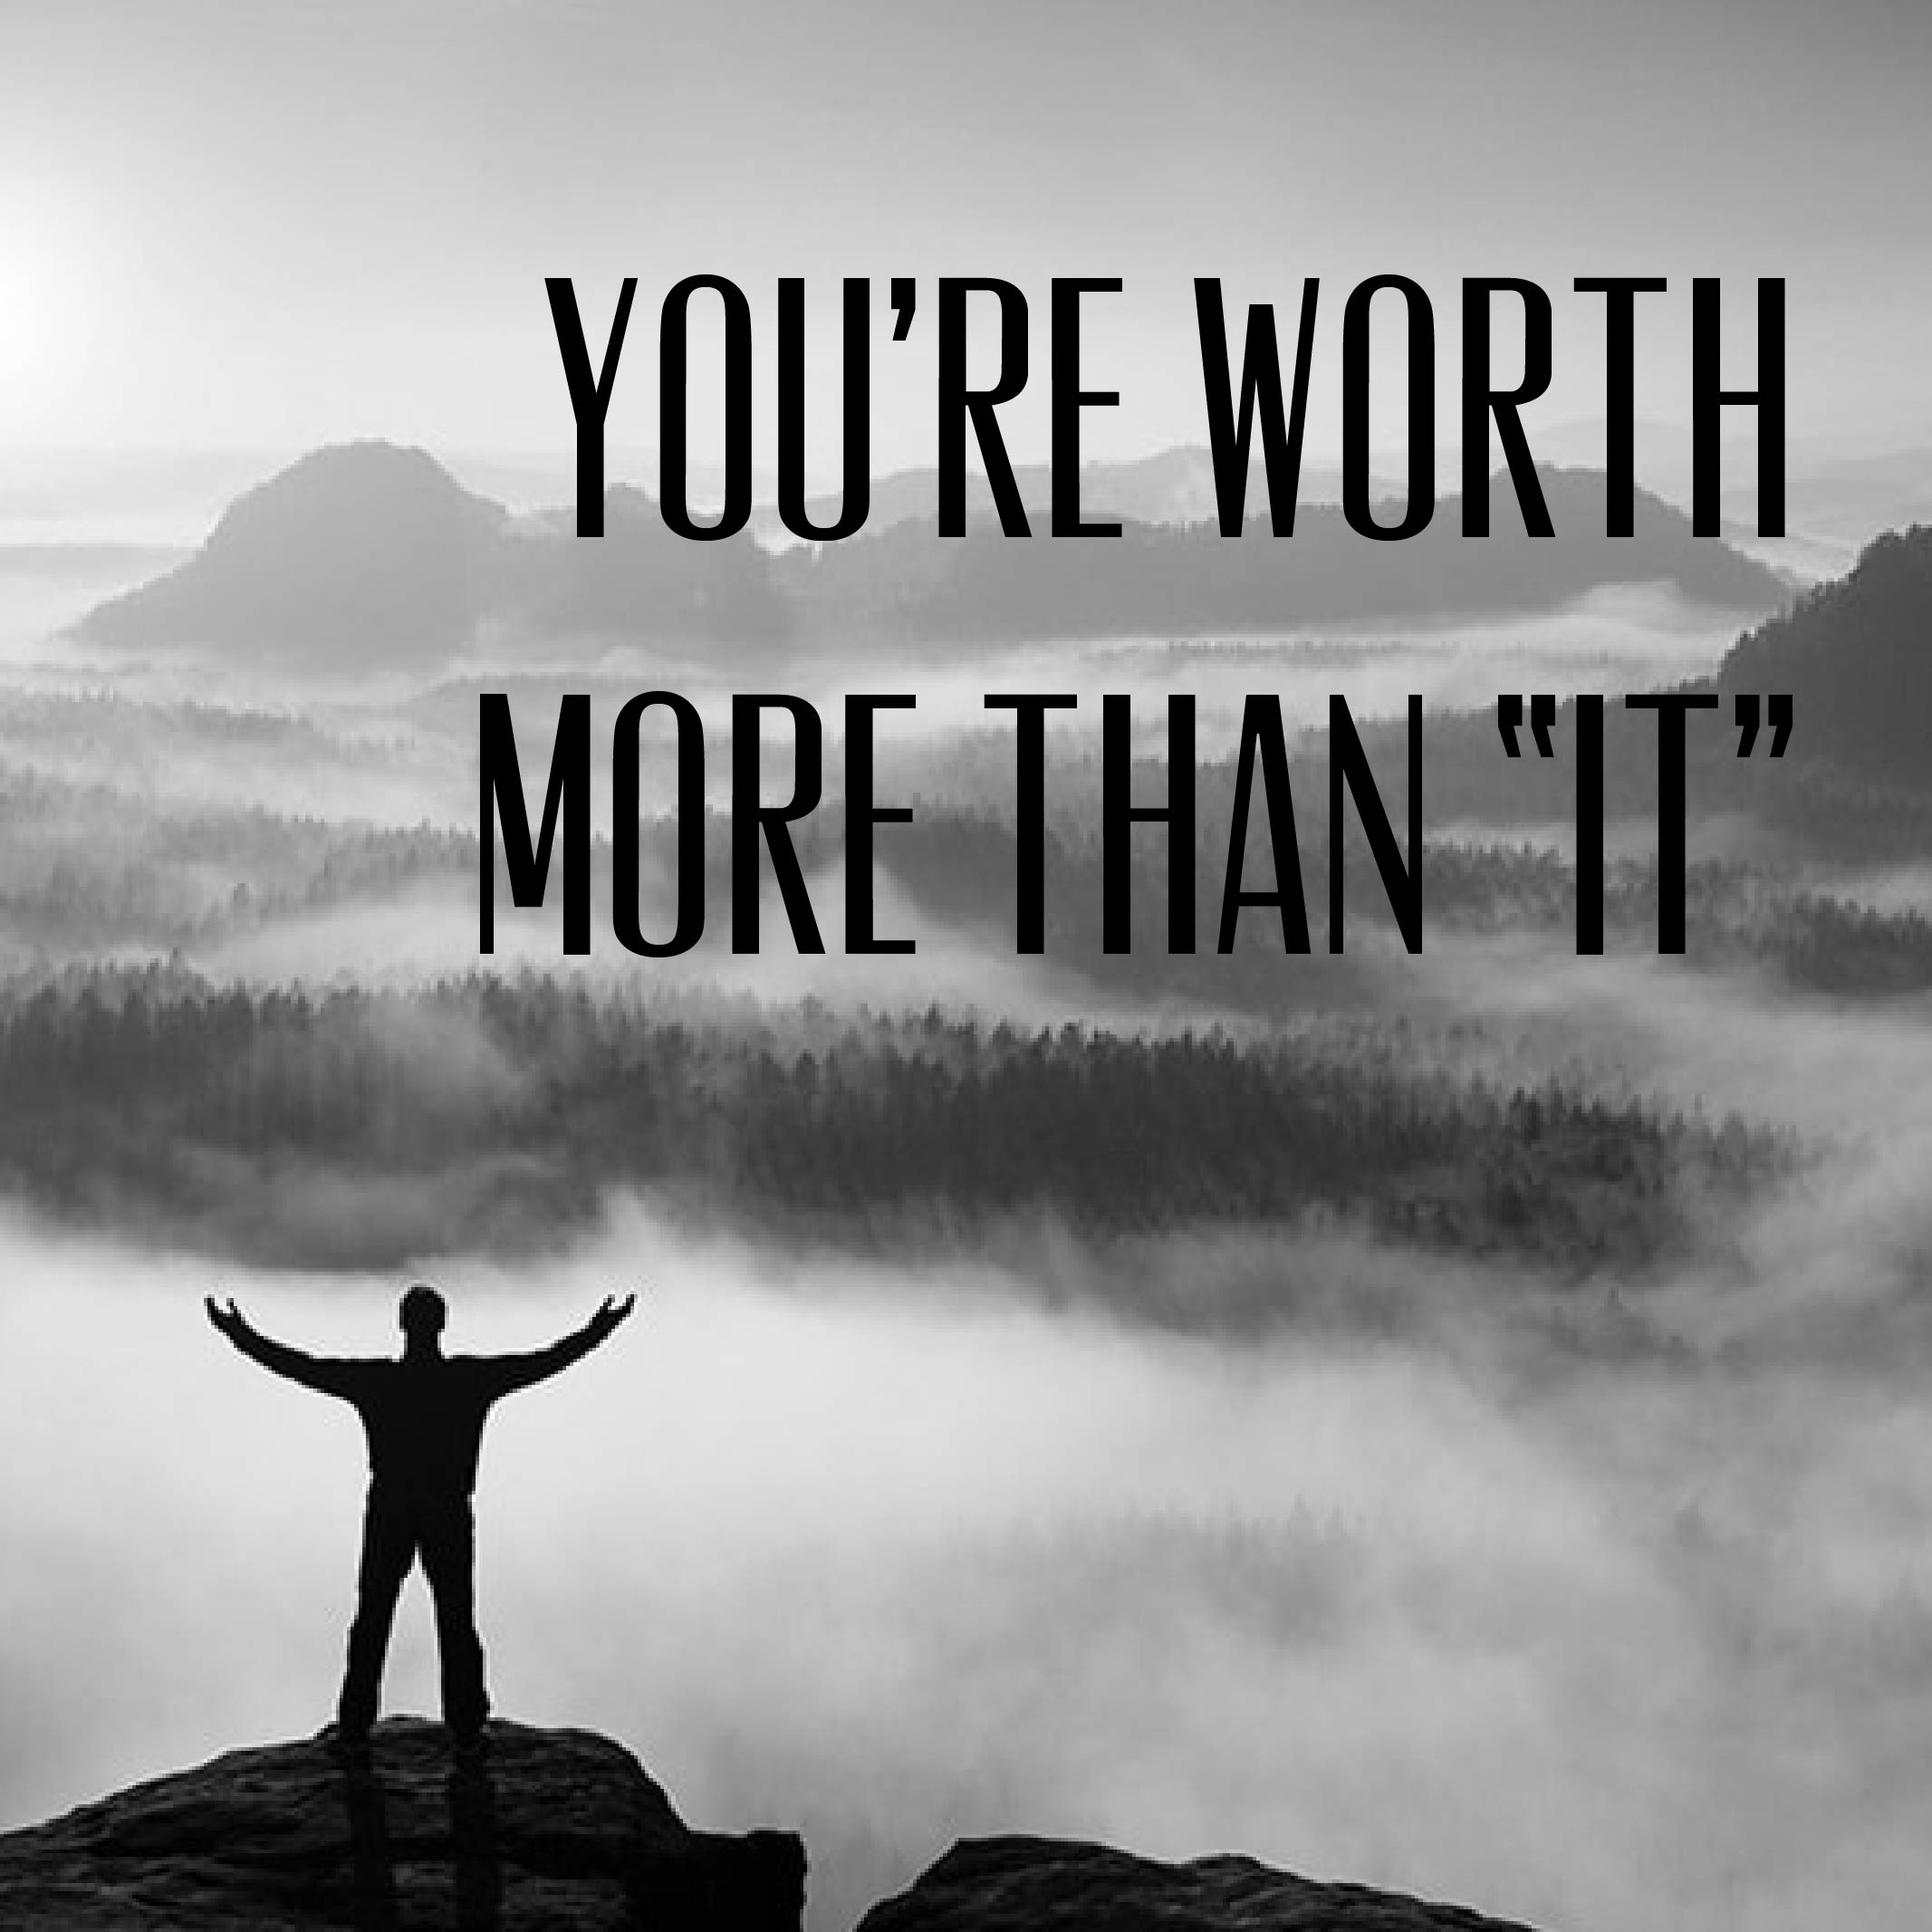 You’re Worth More Than “IT”